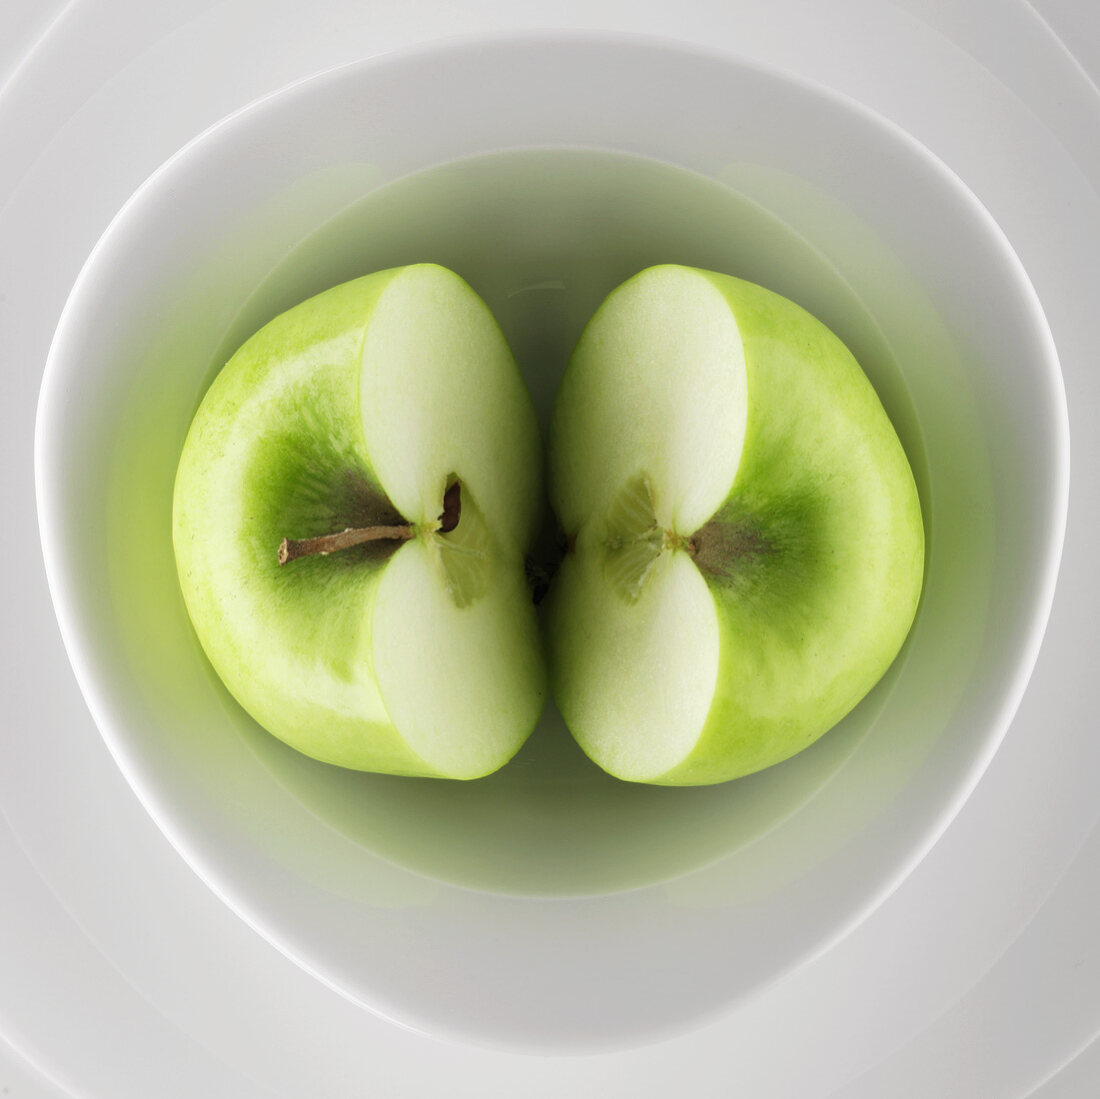 Halved green apple in a bowl